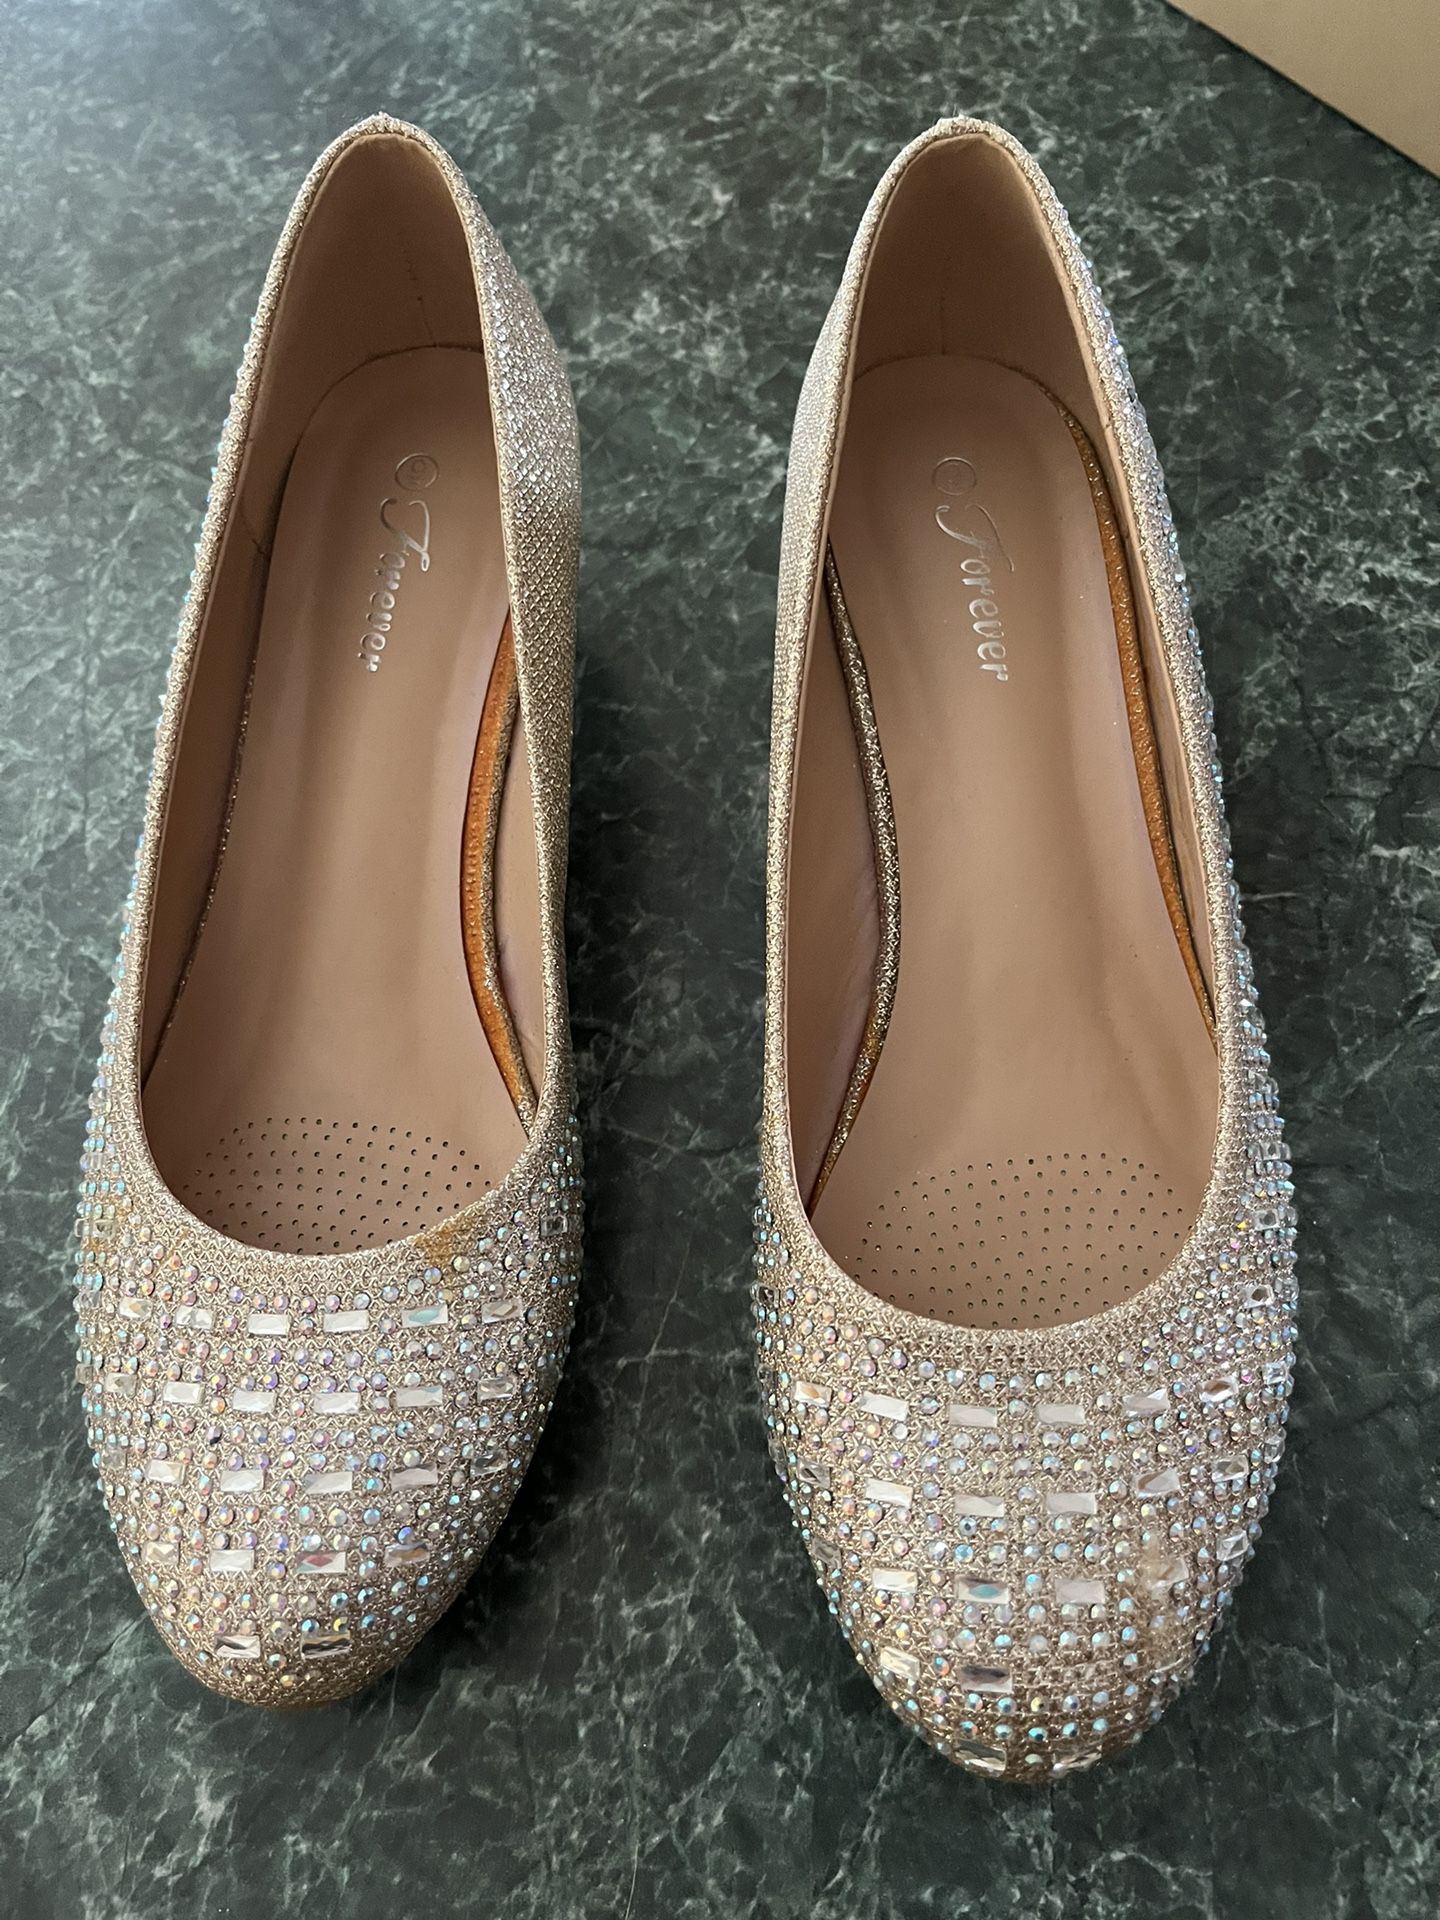 Women’s Sparkly Dress Shoes 